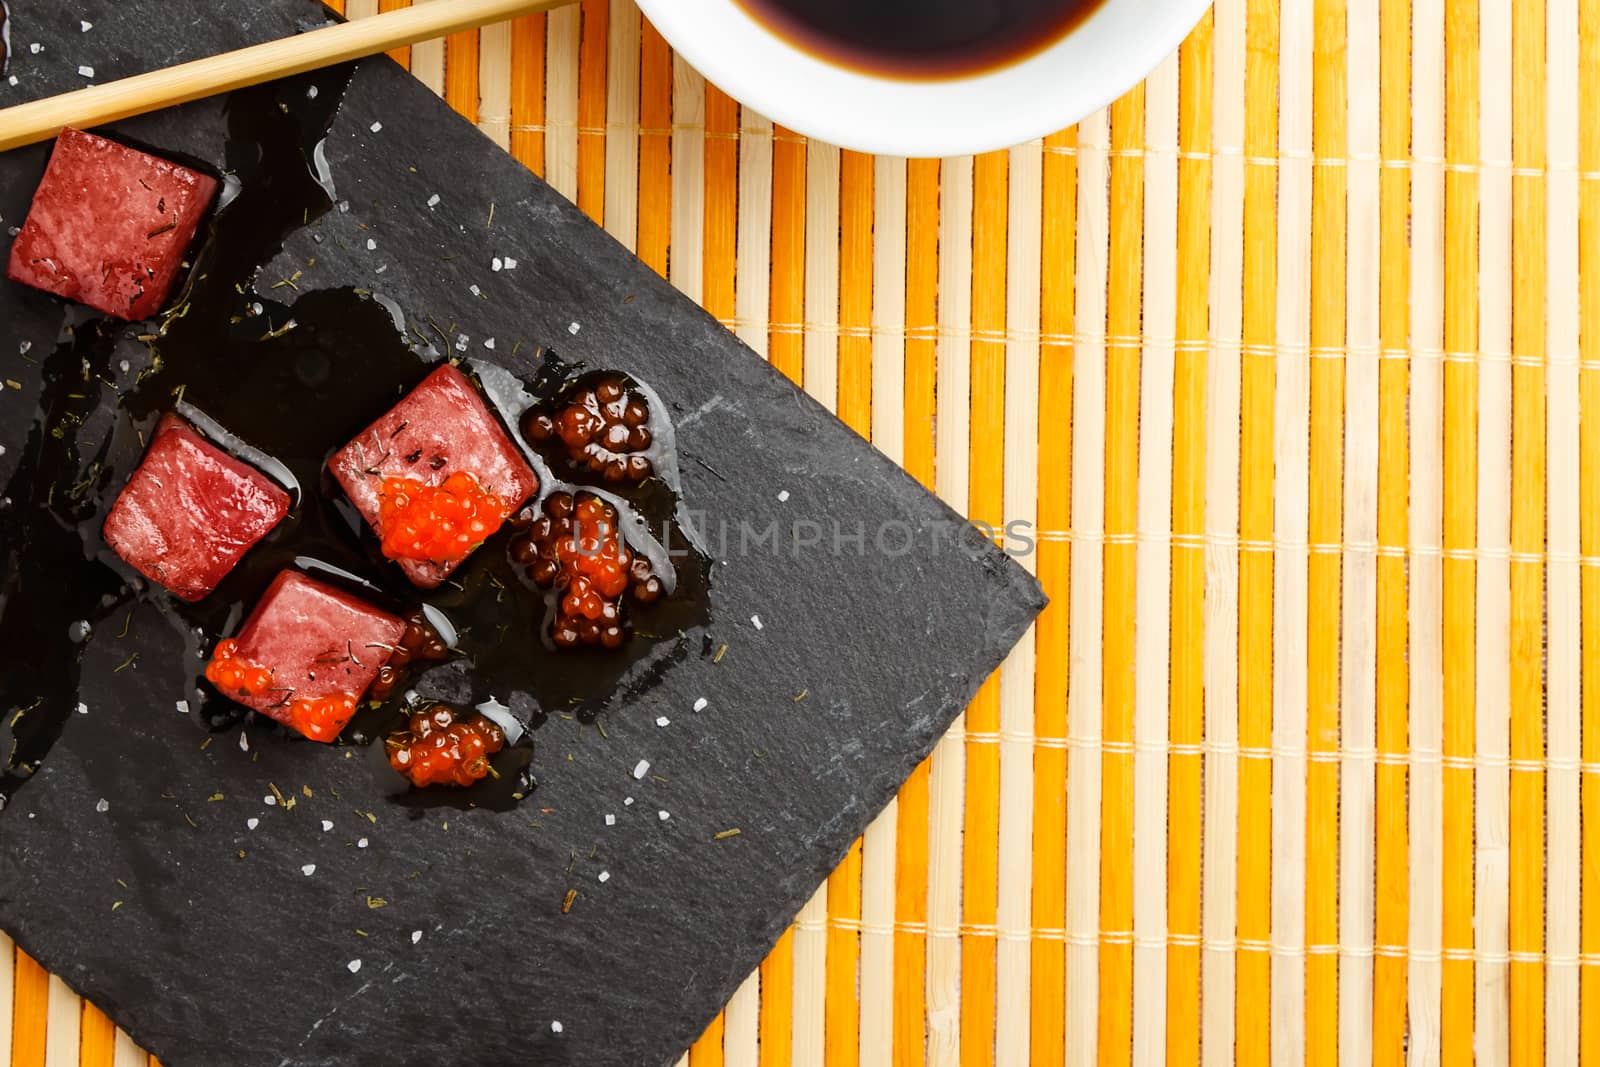 Tuna sashimi dipped in soy sauce with salmon roe, thick salt and dill on slate stone with chopsticks and bowl with soy viewed from above. Raw fish in traditional Japanese style. Horizontal image.